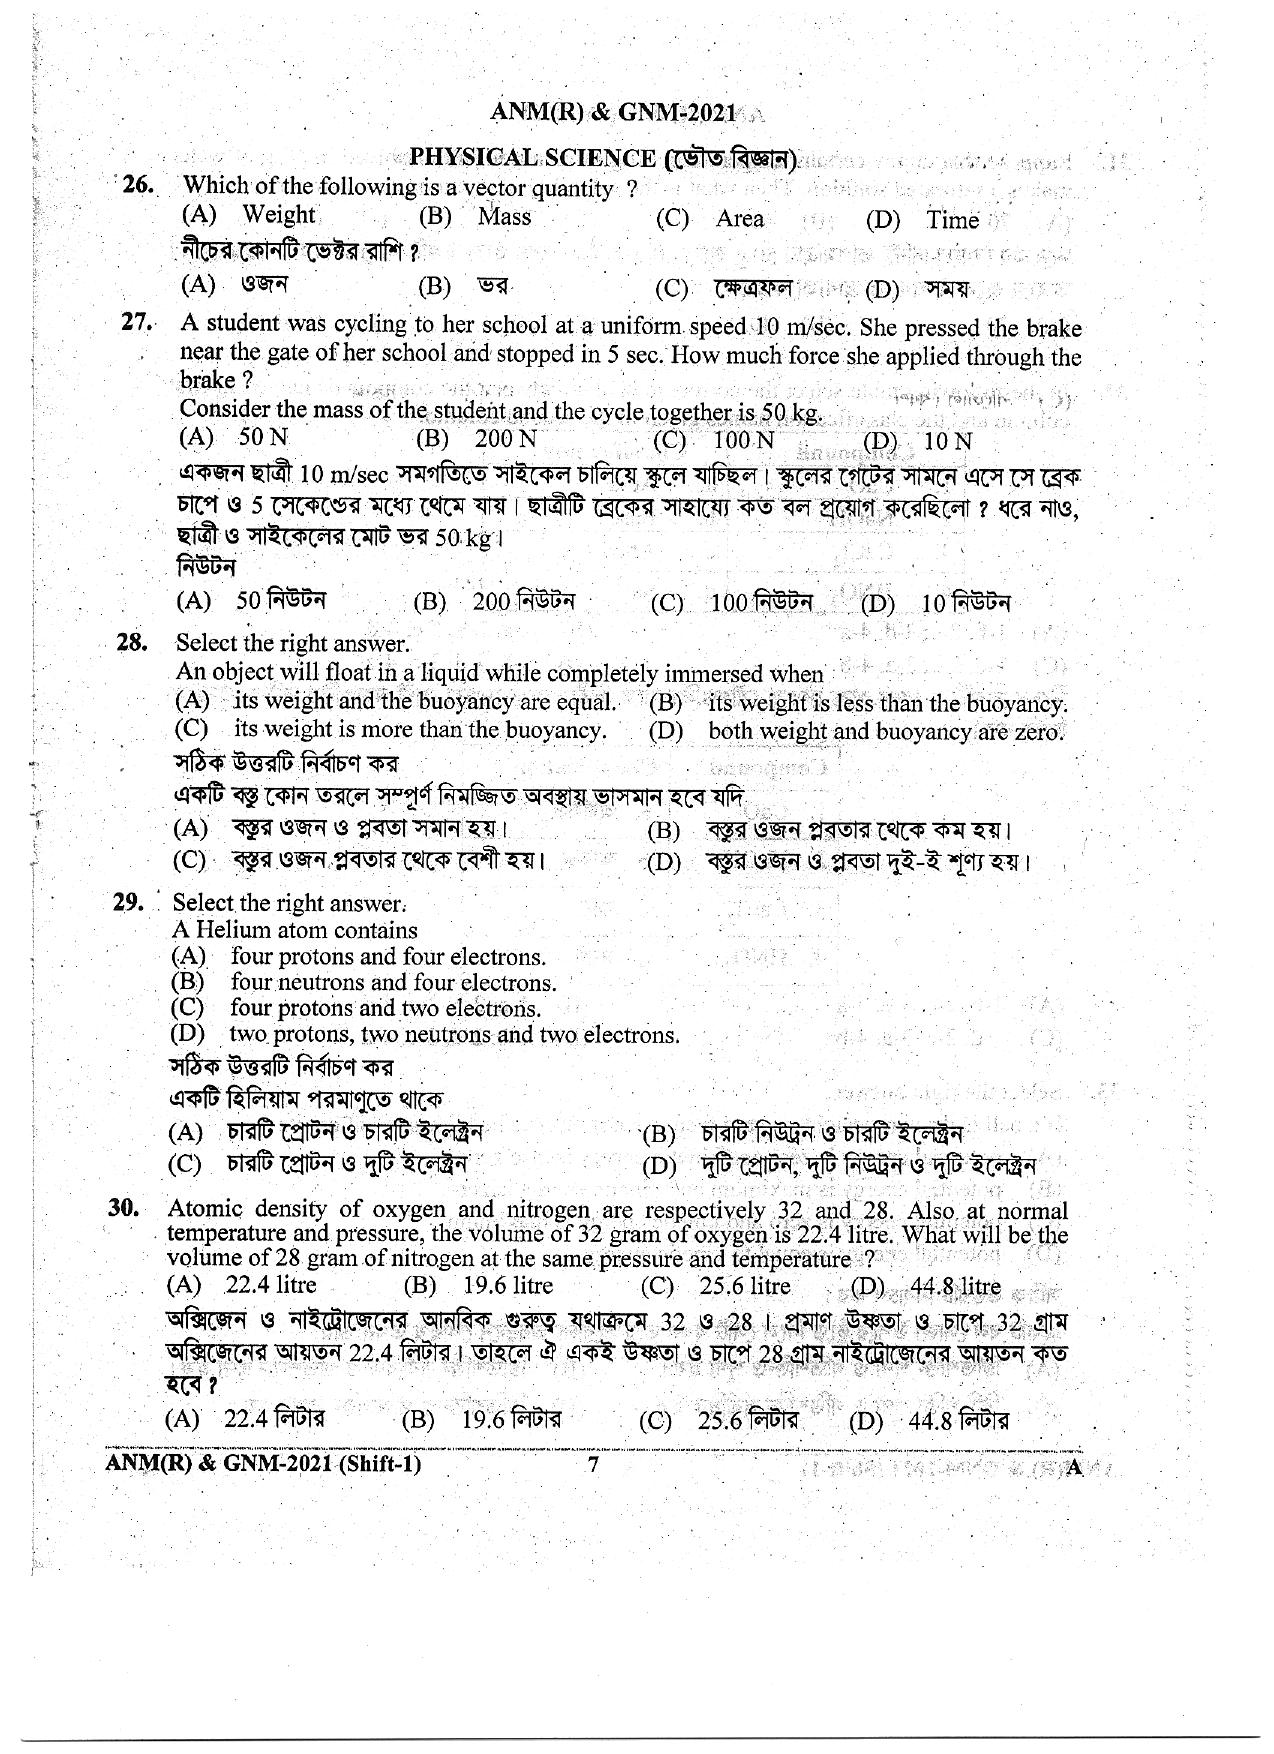 WB ANM GNM 2021 Session I Question Paper - Page 7